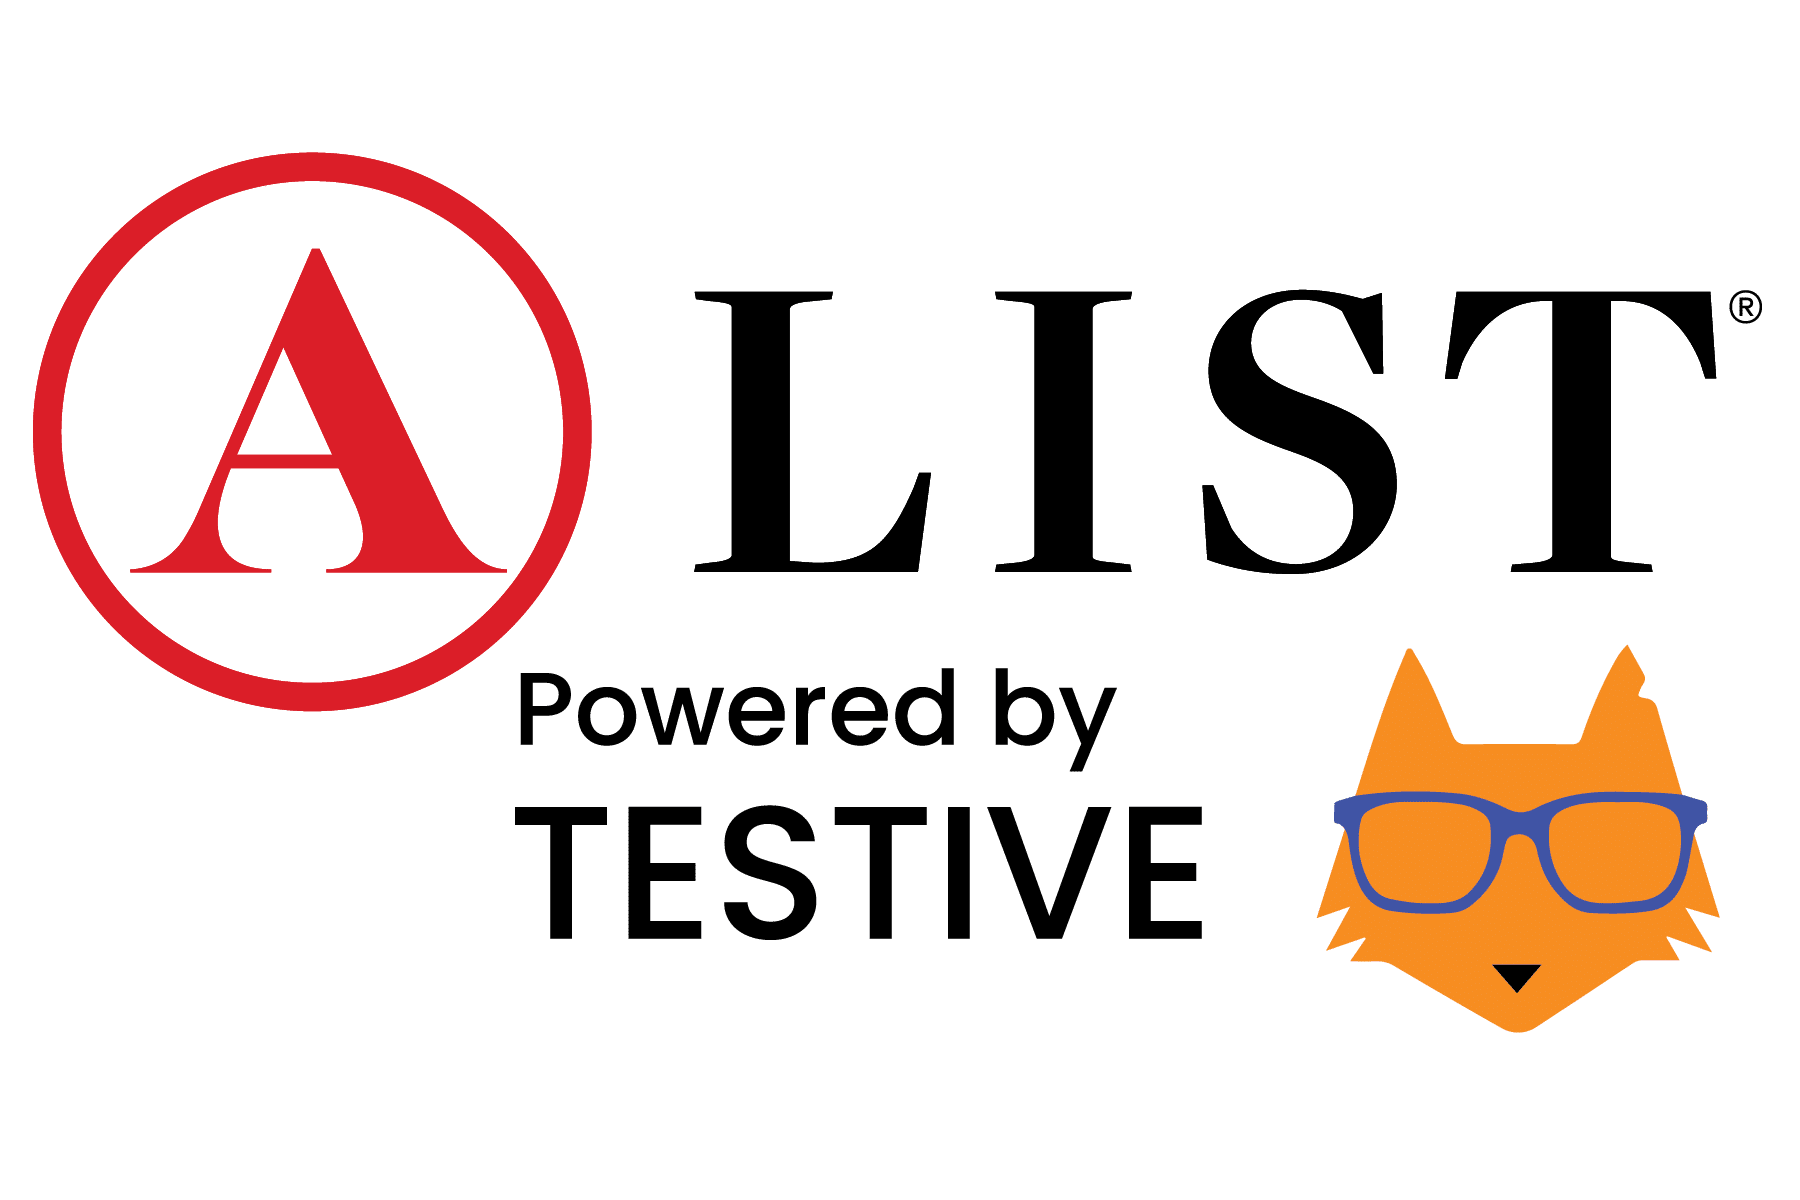 A-List Powered by Testive College Admissions Consulting